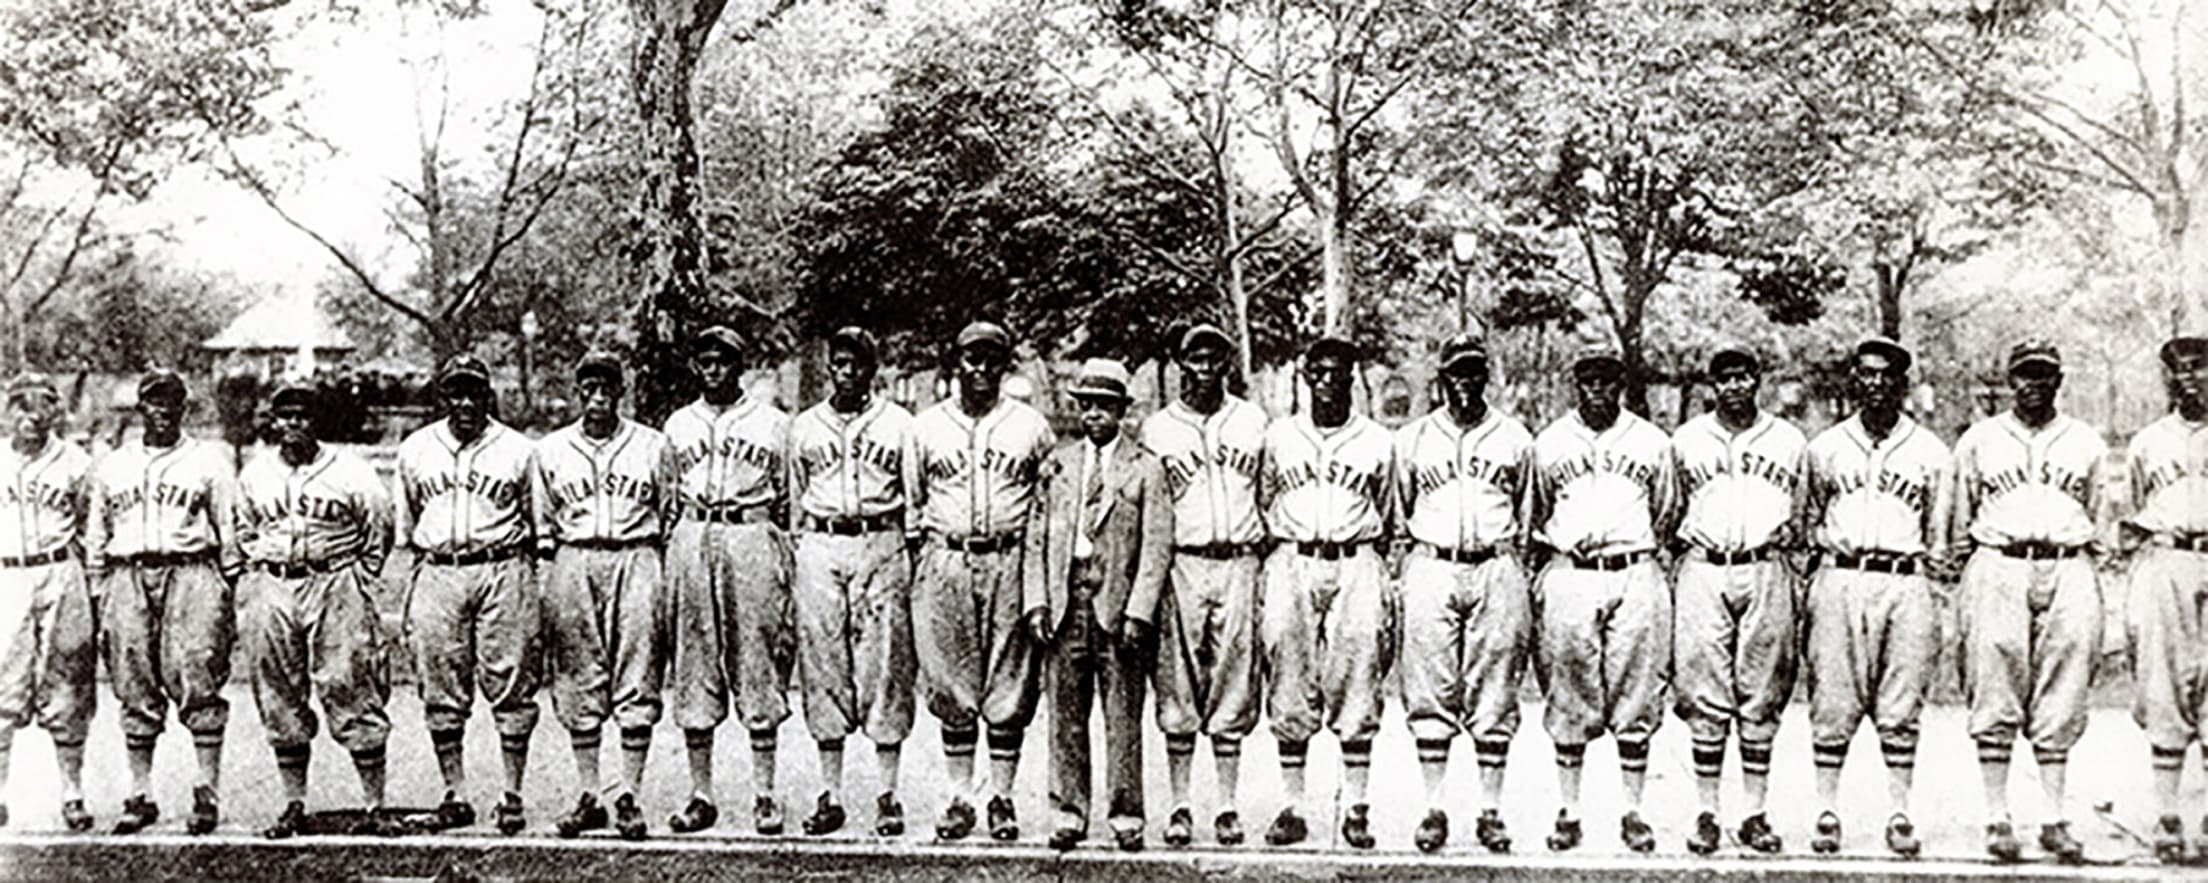 Philadelphia played an important role in the development of Black baseball